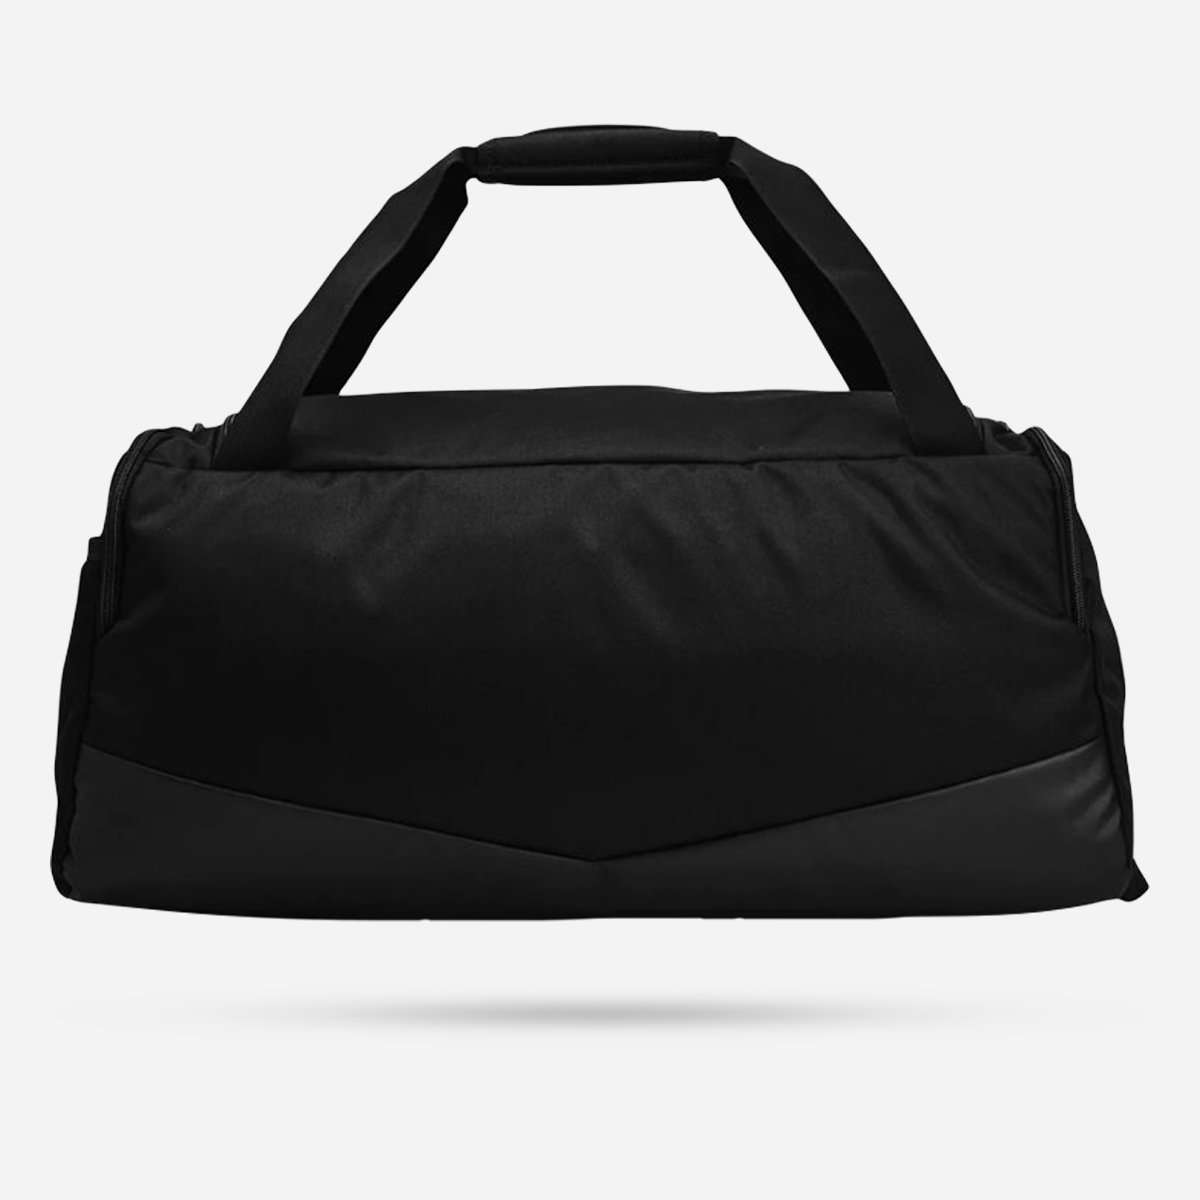 AN291212 Undeniable 5.0 MD Duffle Bag